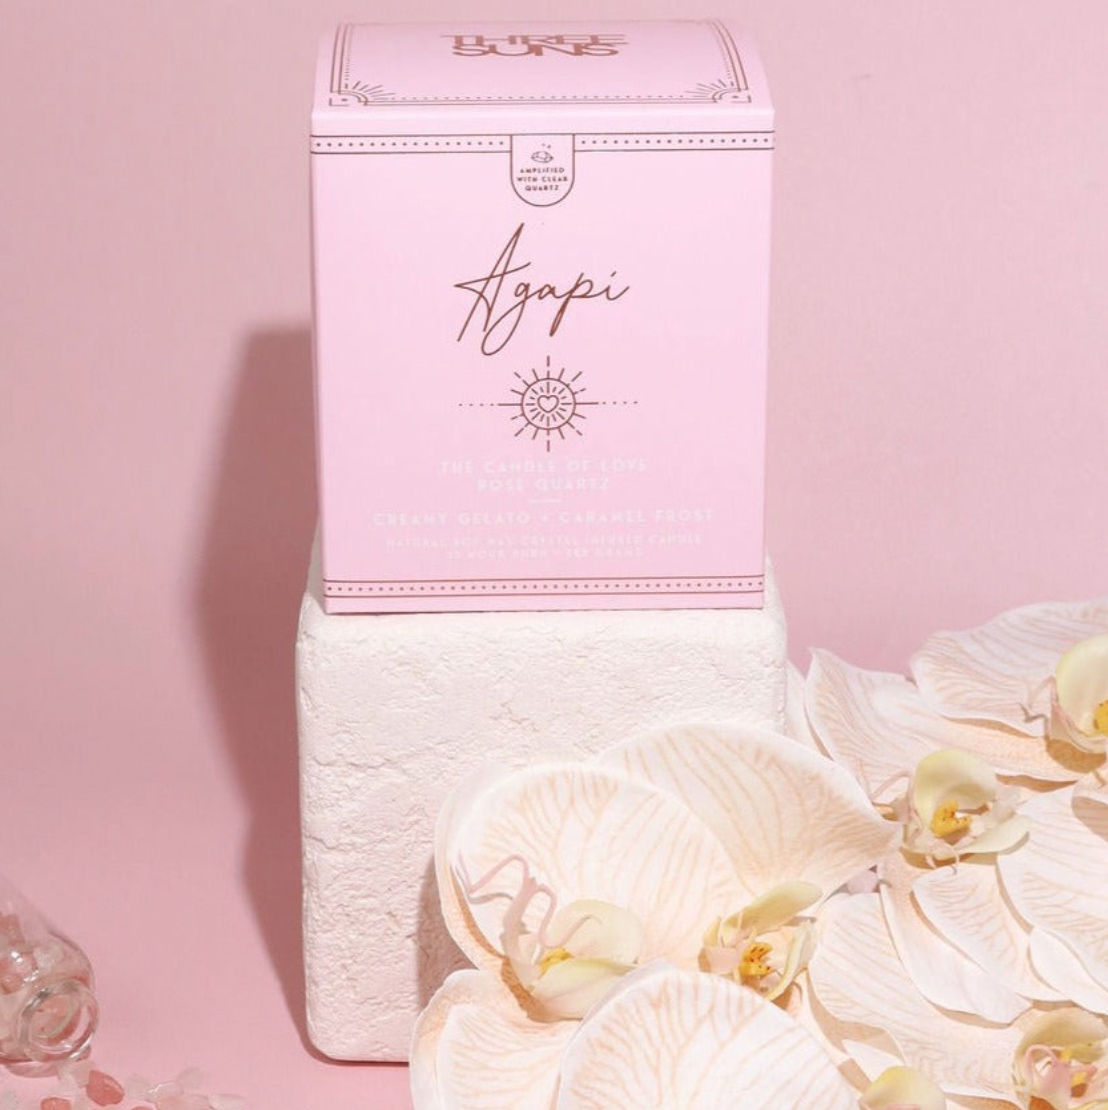 THE CANDLE OF LOVE | AGAPI' - Daisy Grace Lifestyle